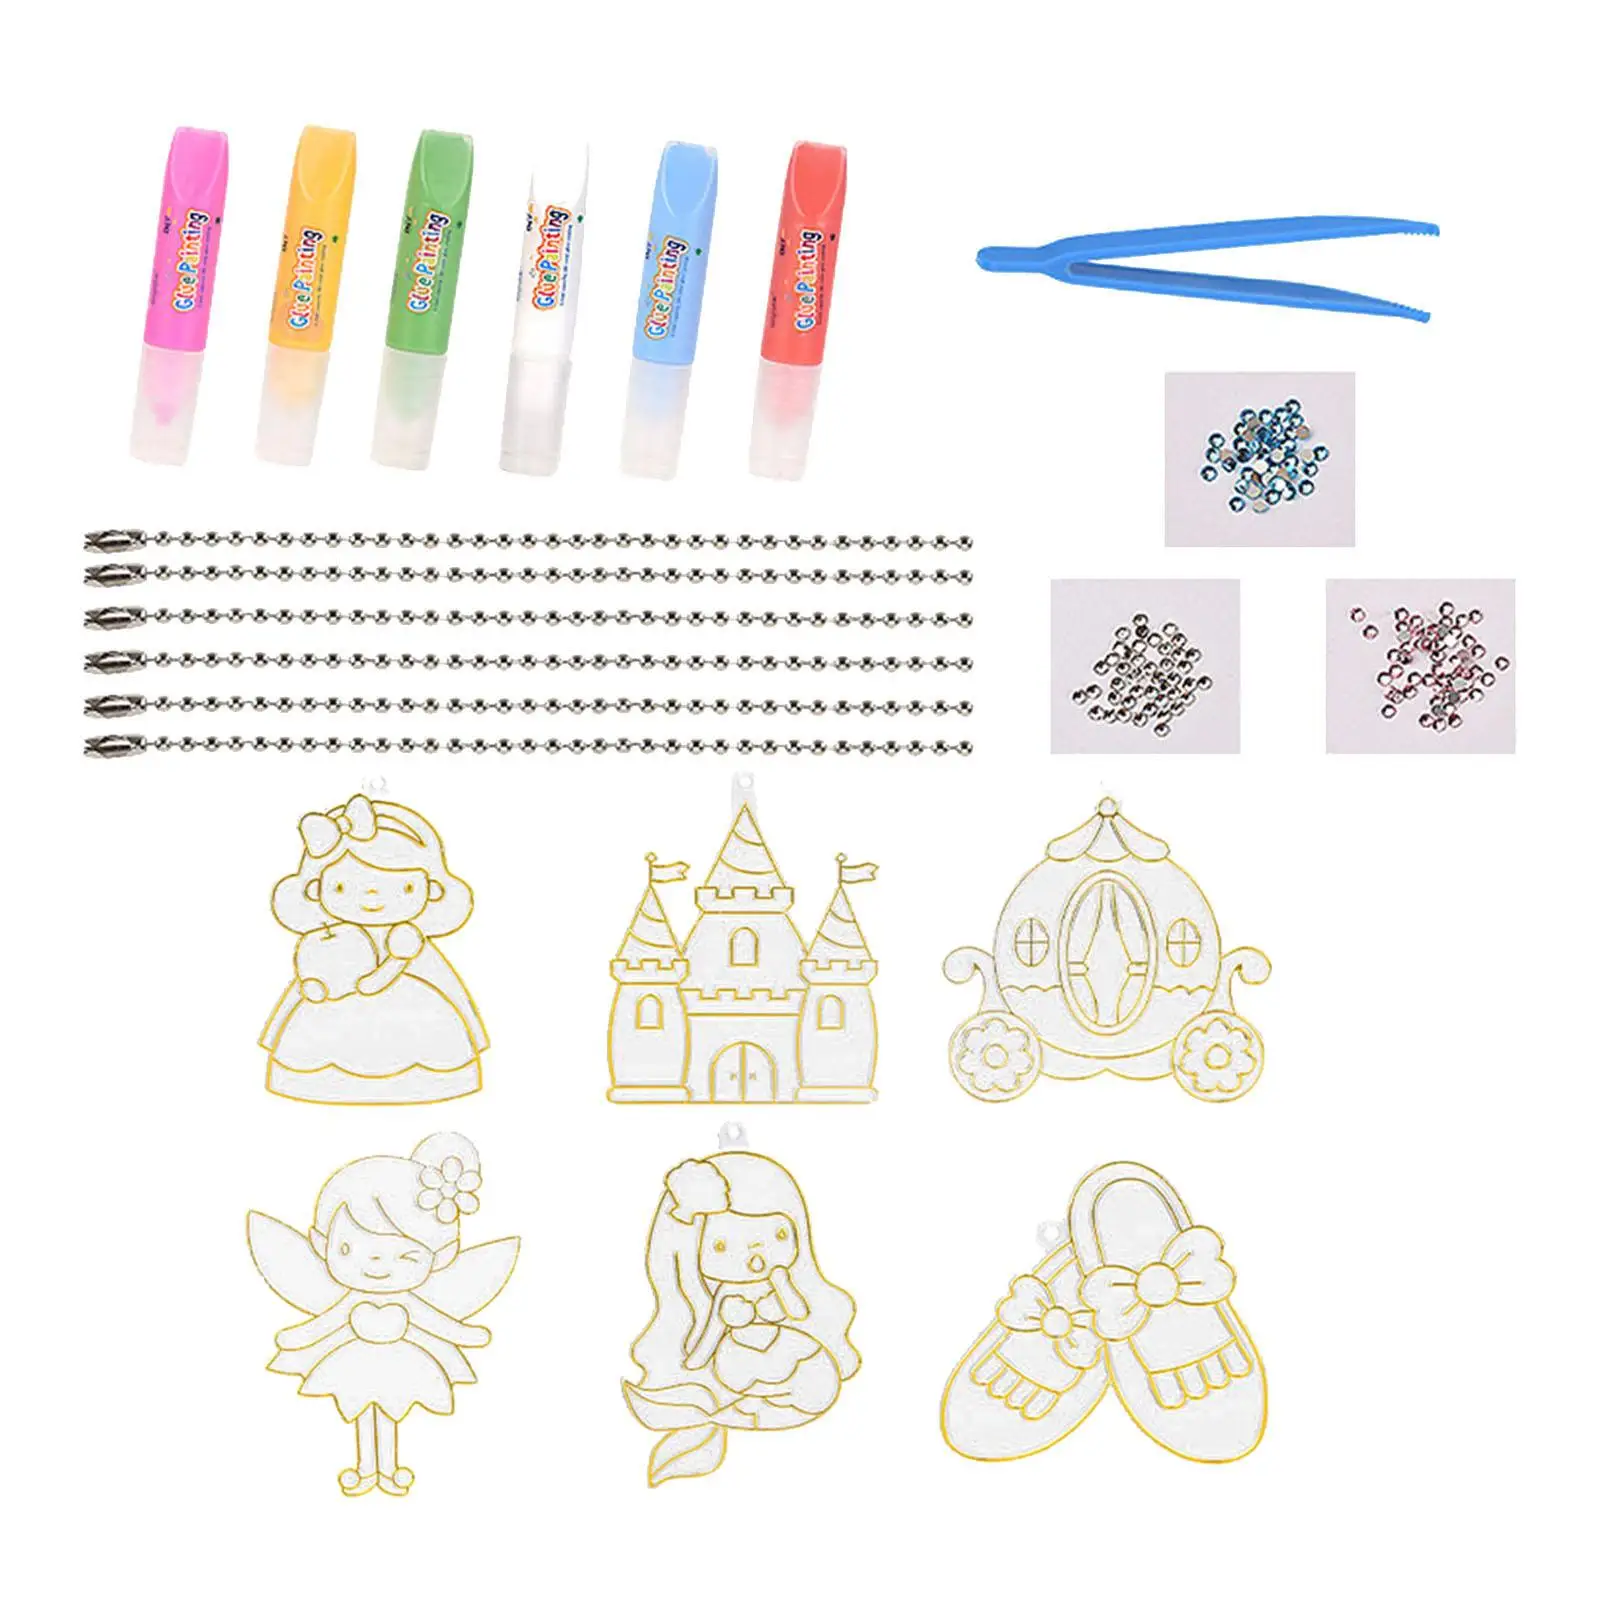 DIY Crystal Paint Arts and Crafts Set Painted Decorate Graffiti Crystal Art Paint Set for Boys Girls Adults Kids Birthday Gifts